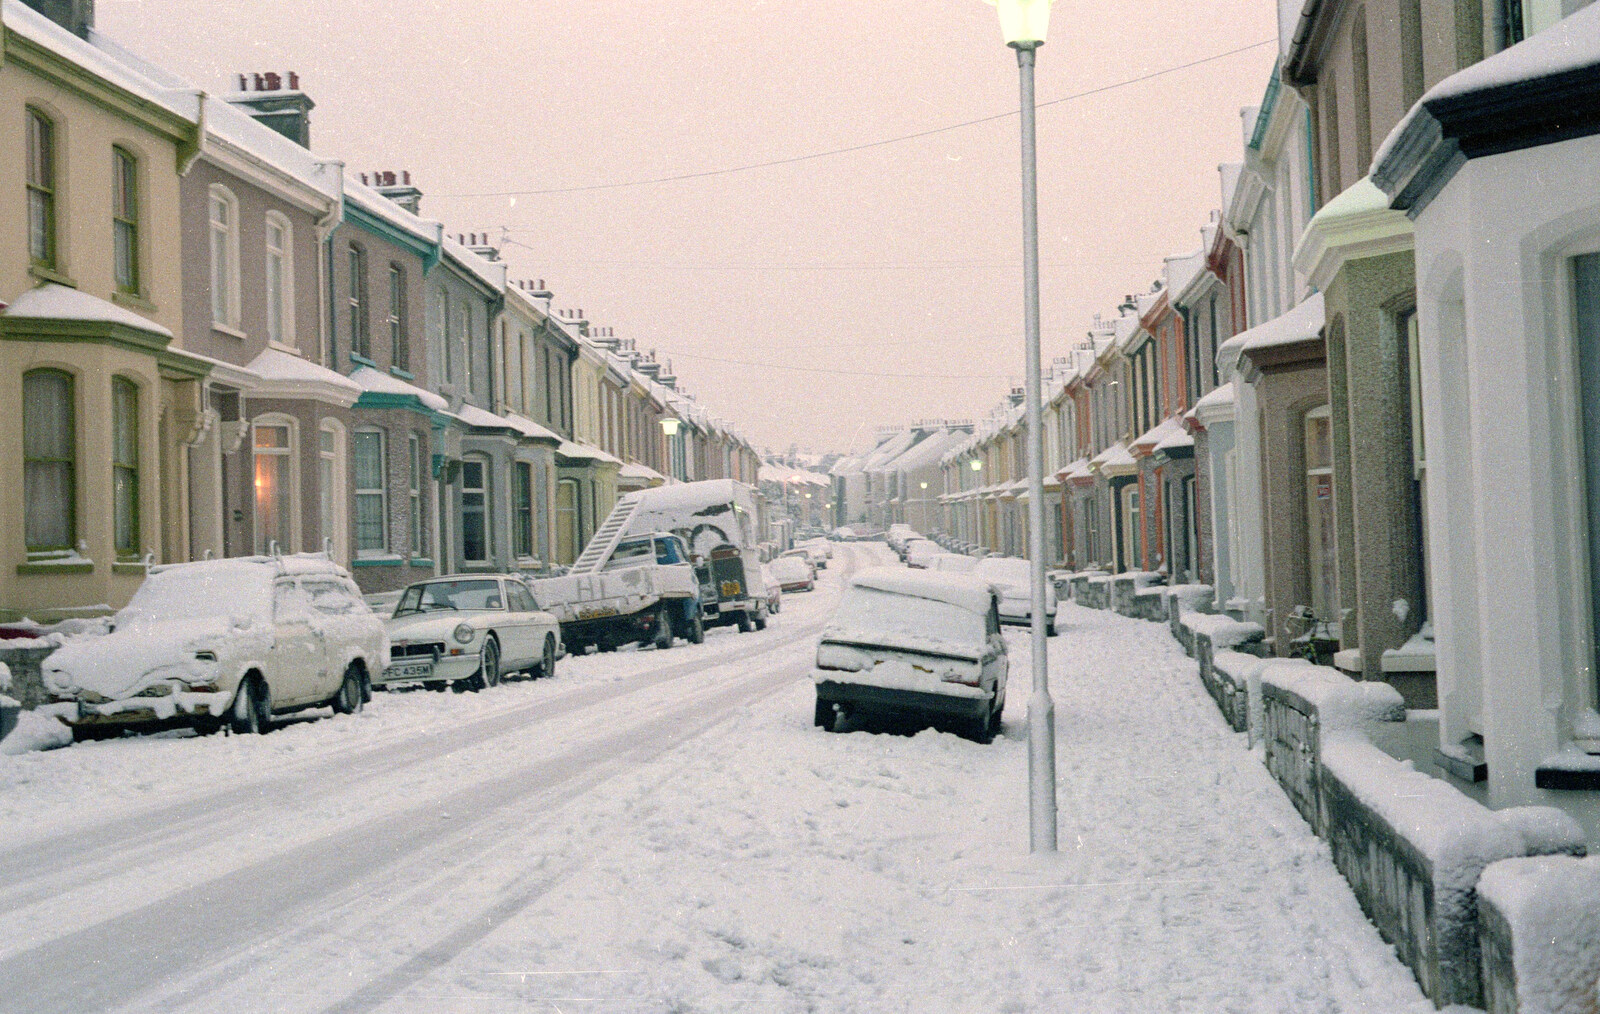 Beaumont Street, Milehouse, in the snow from Uni: RAG Week Abseil, Hitch Hike, and Beaumont Street Life Plymouth, Devon - 13th February 1986